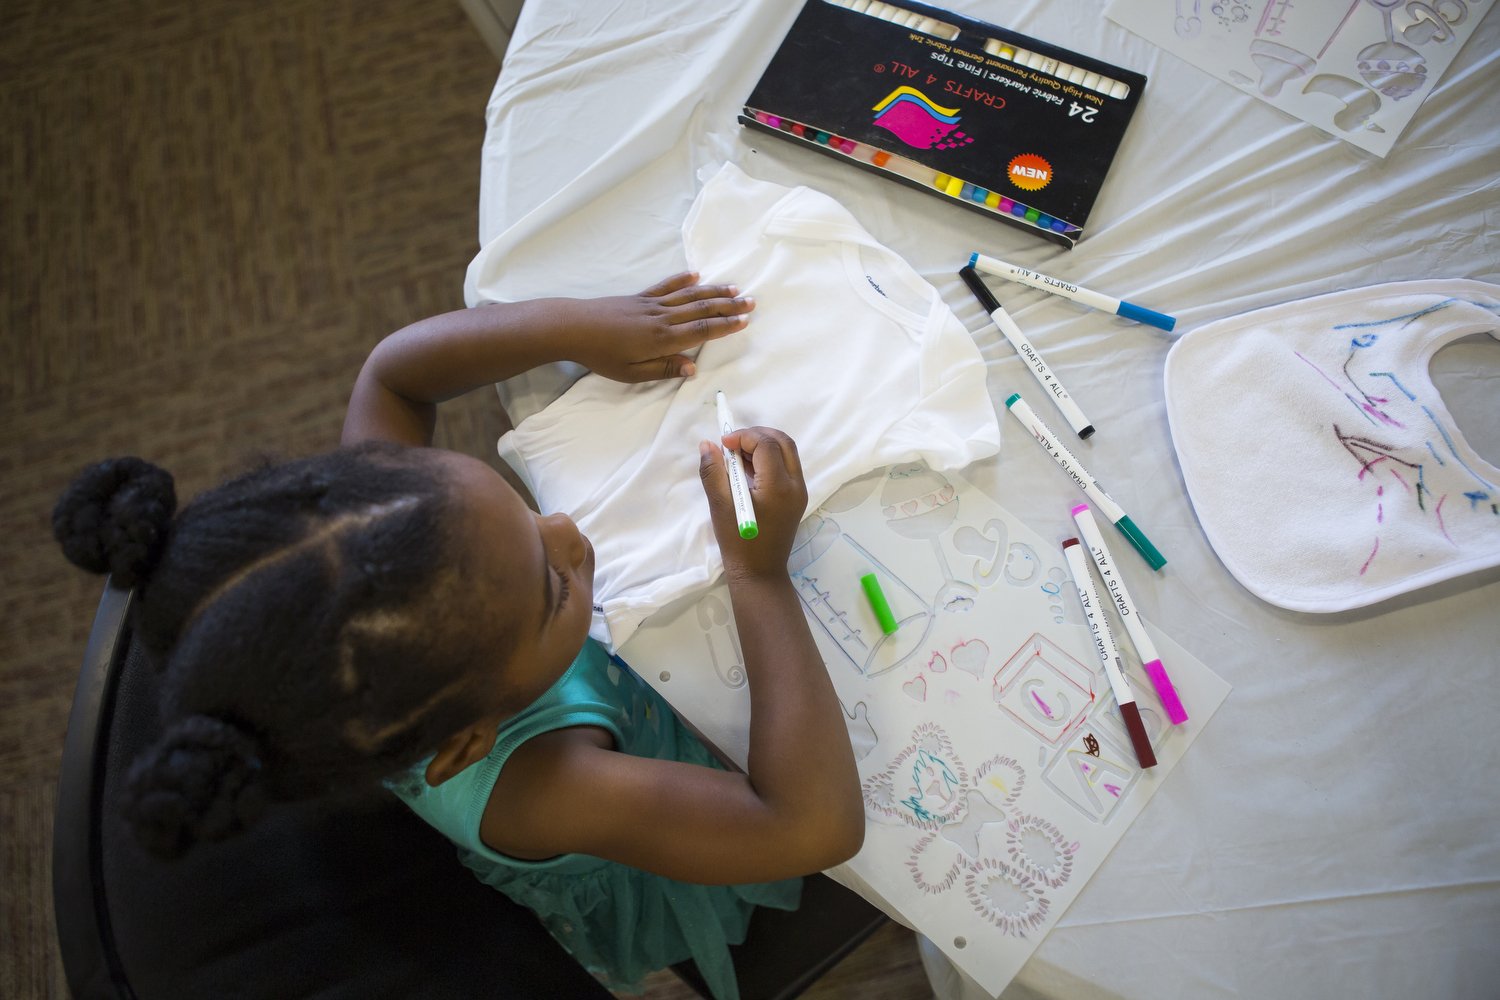  Healthy Moms, Healthy Babies Community Resource Fair hosted by Duke University Department of Family Medicine and Community Health at the NC Cooperative Extension Office in Durham on Saturday, June 22, 2019. 